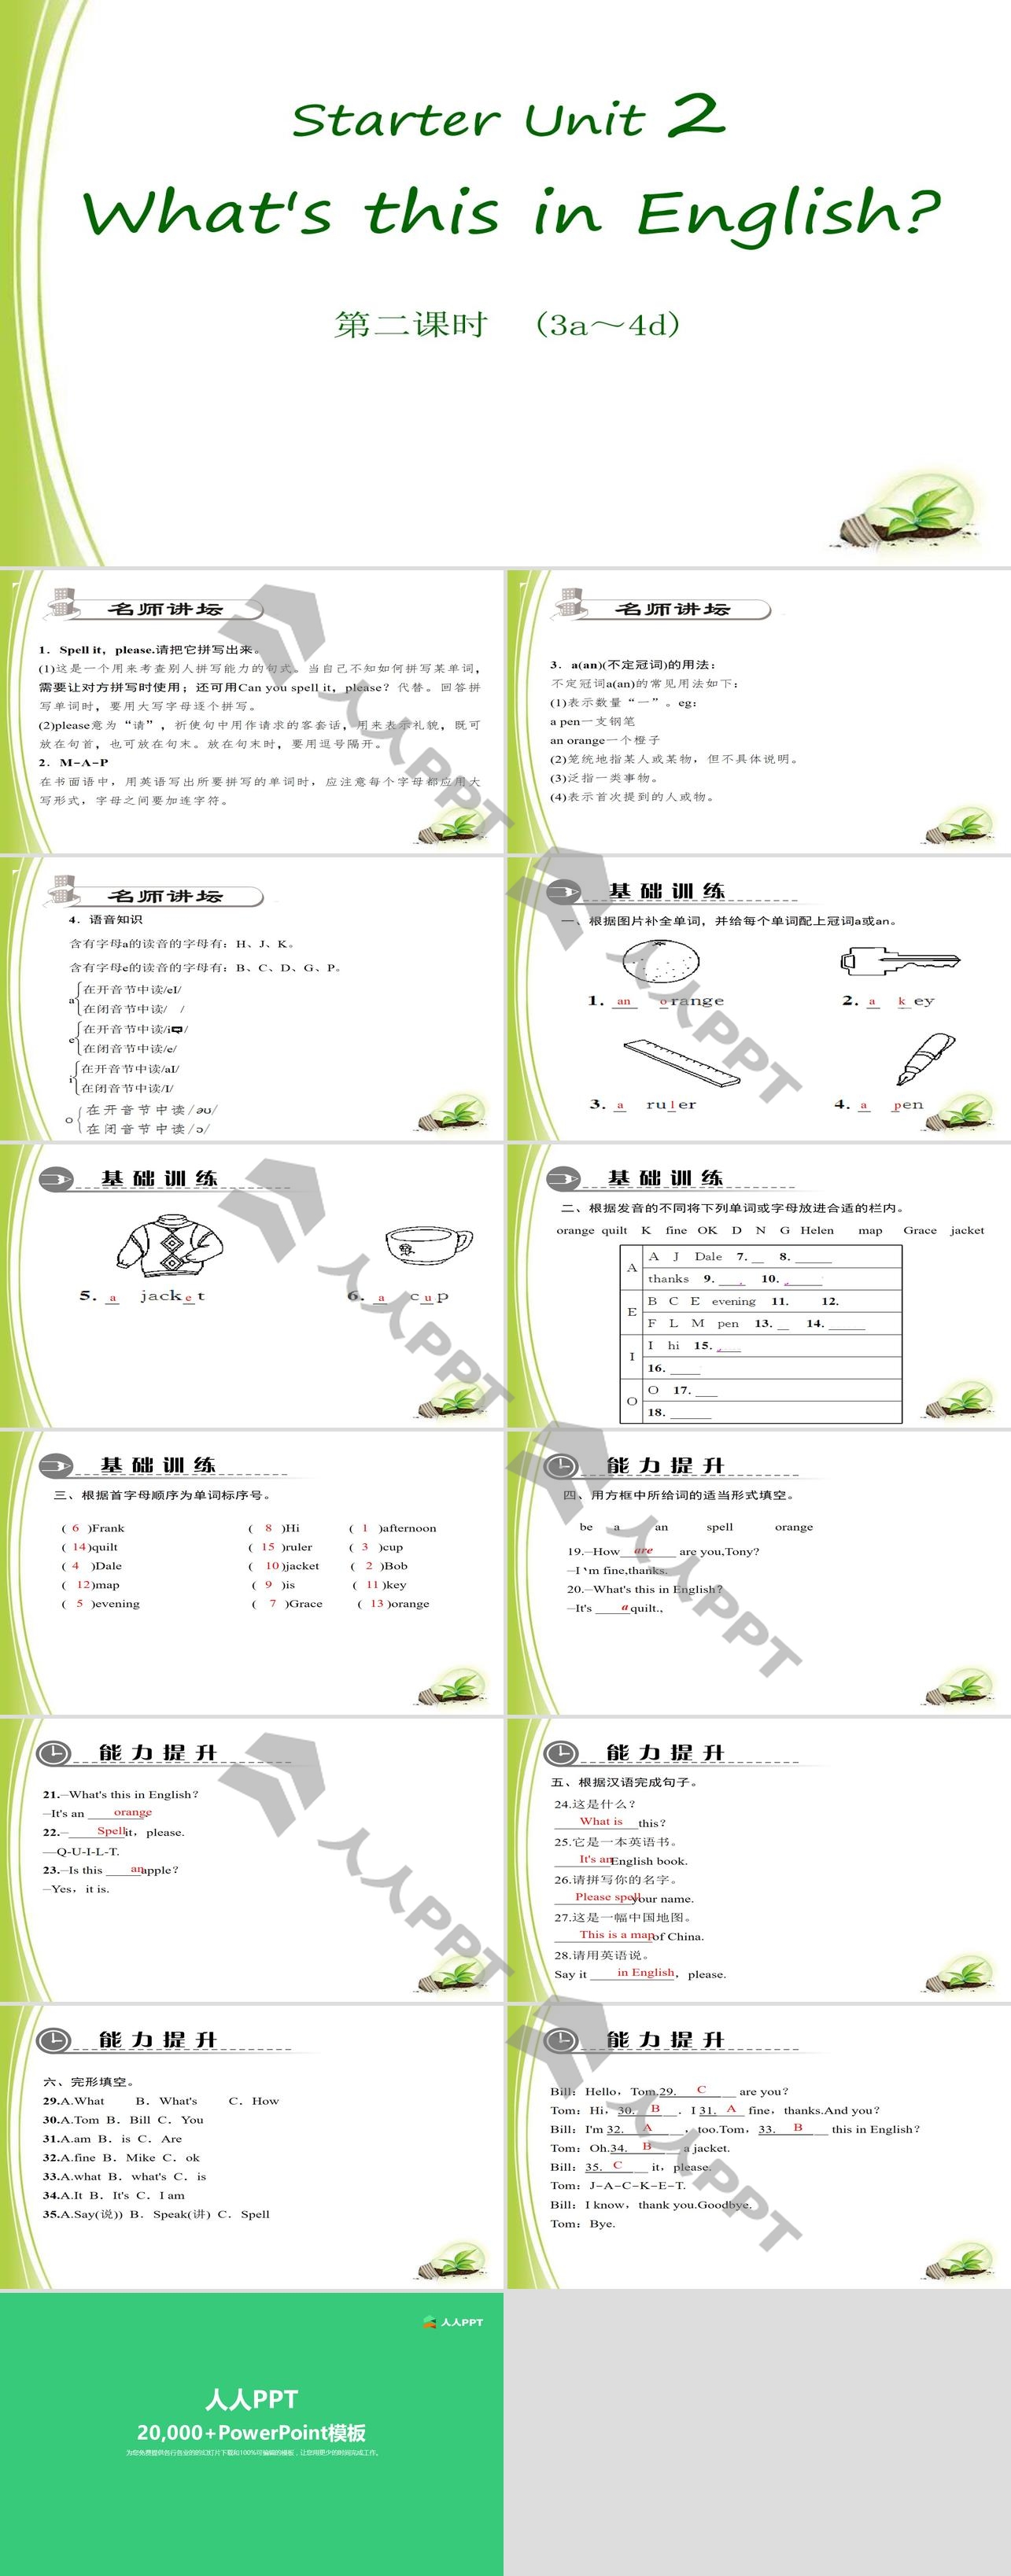 《What's this in English?》StarterUnit2PPT课件7长图